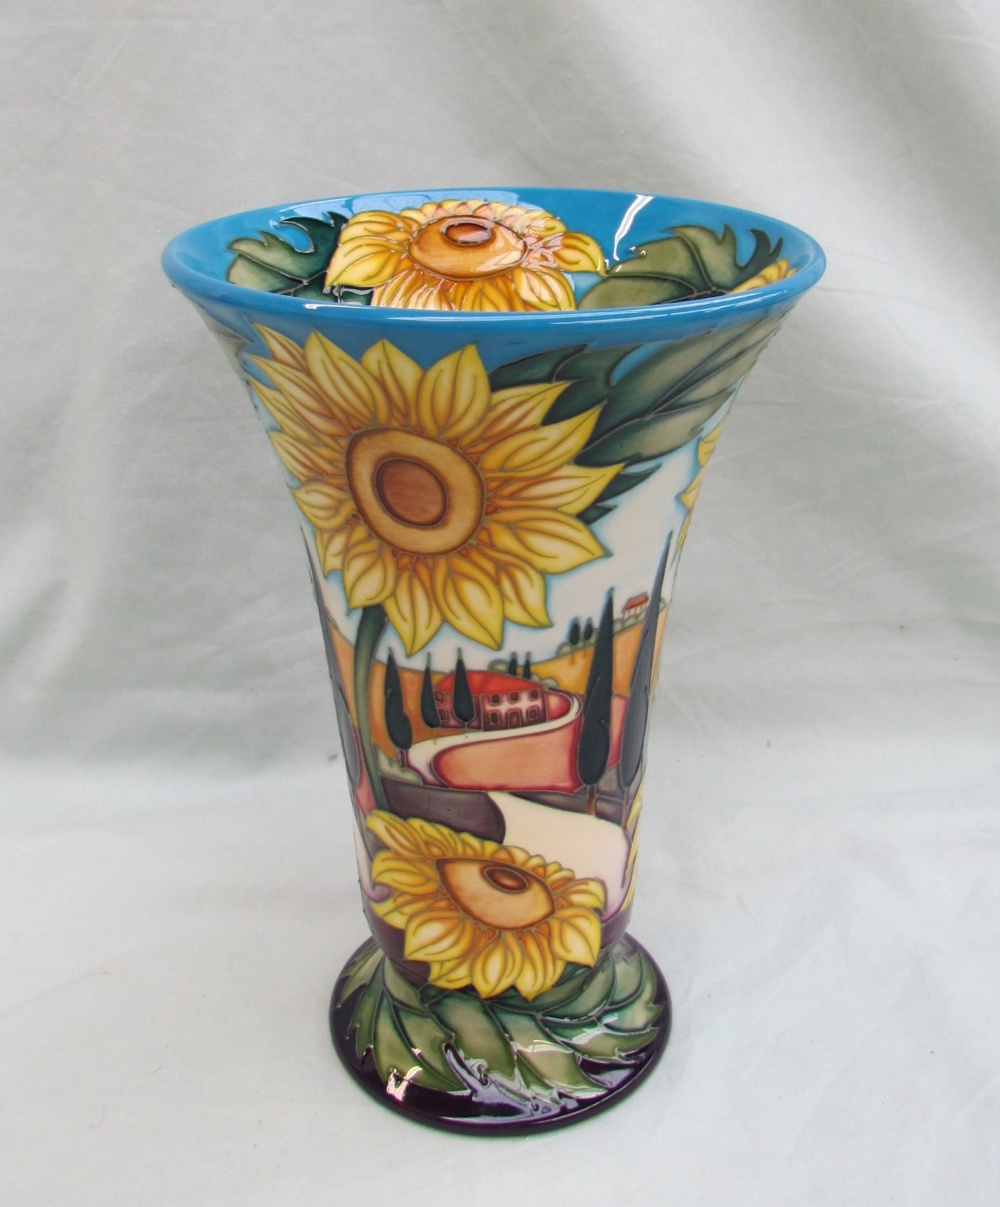 A Moorcroft pottery vase of flared tapering form on a spreading foot decorated in the "White road